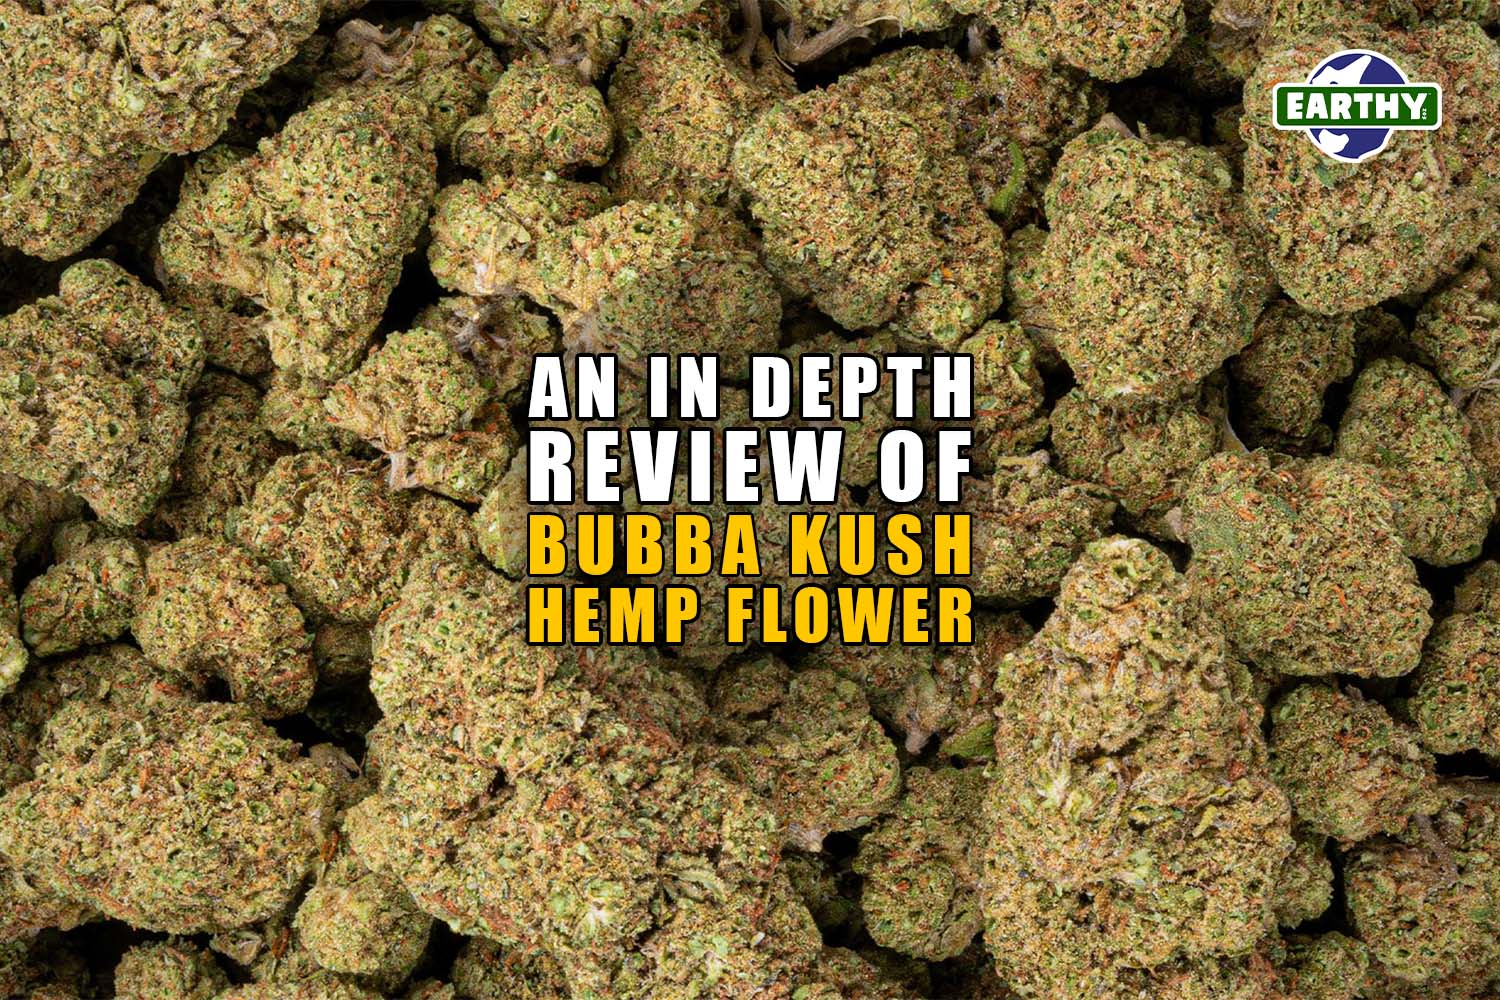 An In-depth review of Bubba Kush Hemp Flower. Earthy Now